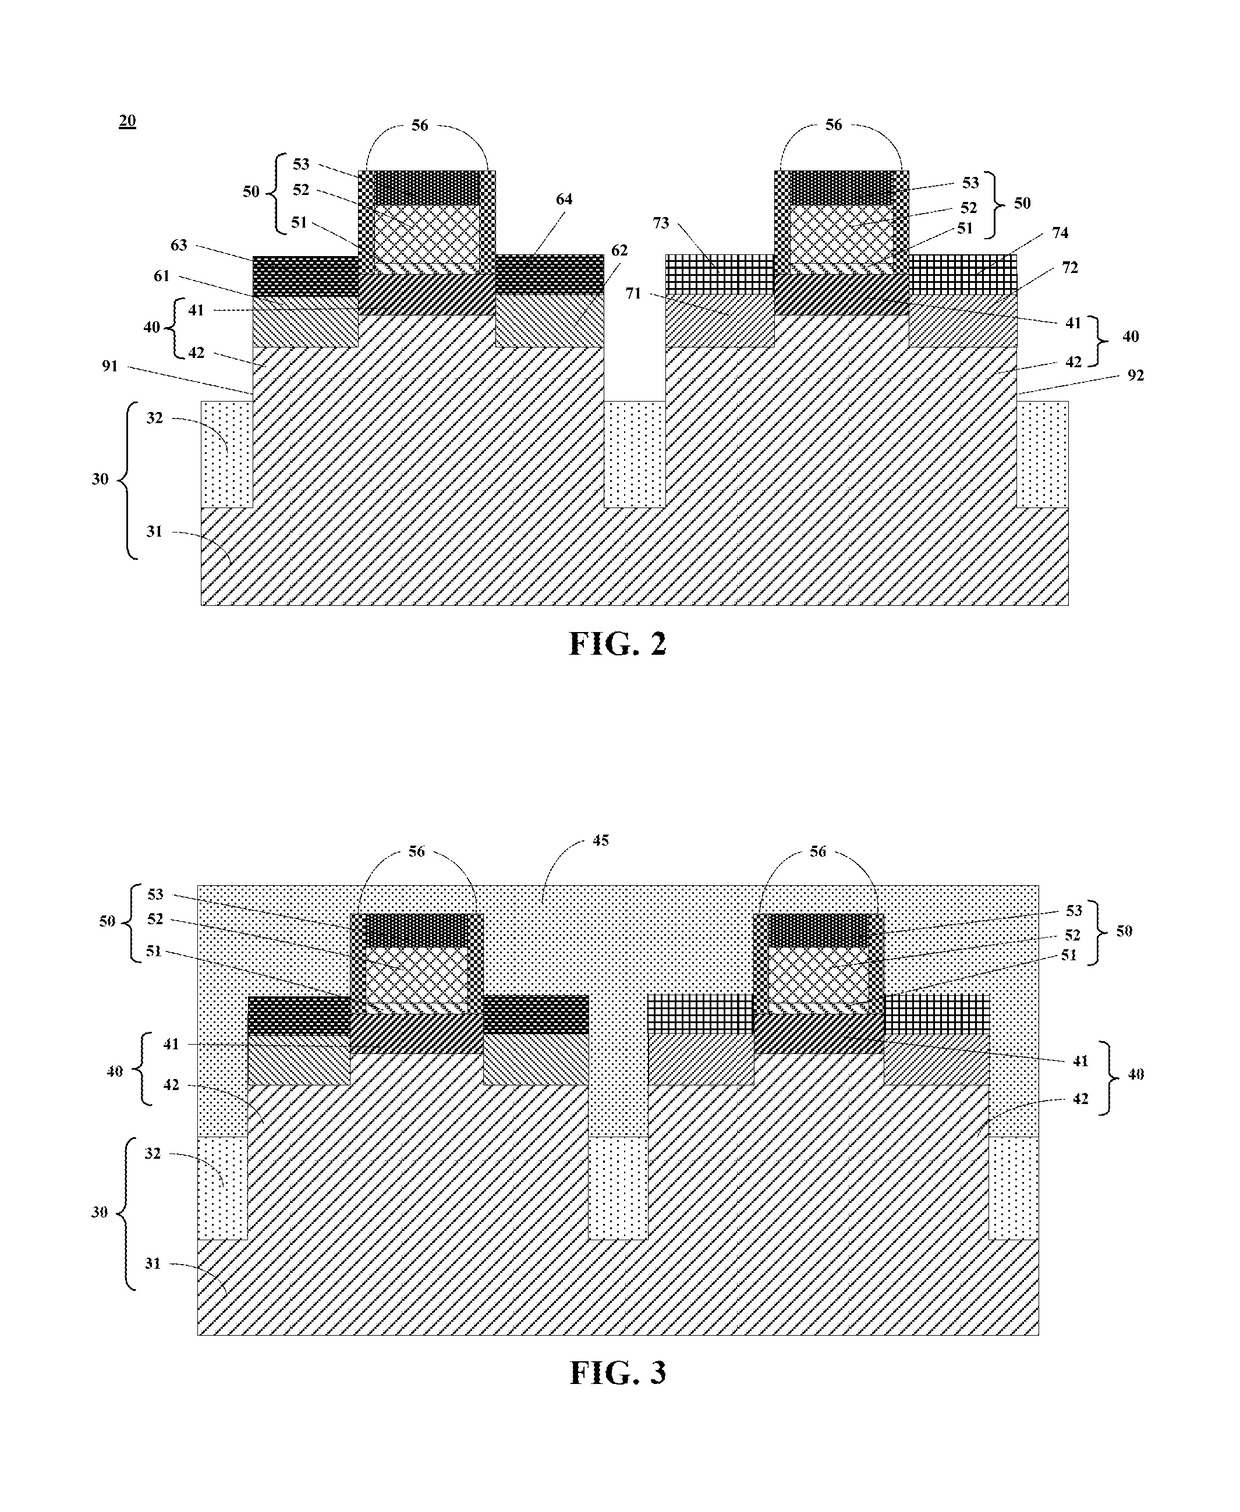 Method to improve GE channel interfacial layer quality for CMOS FINFET